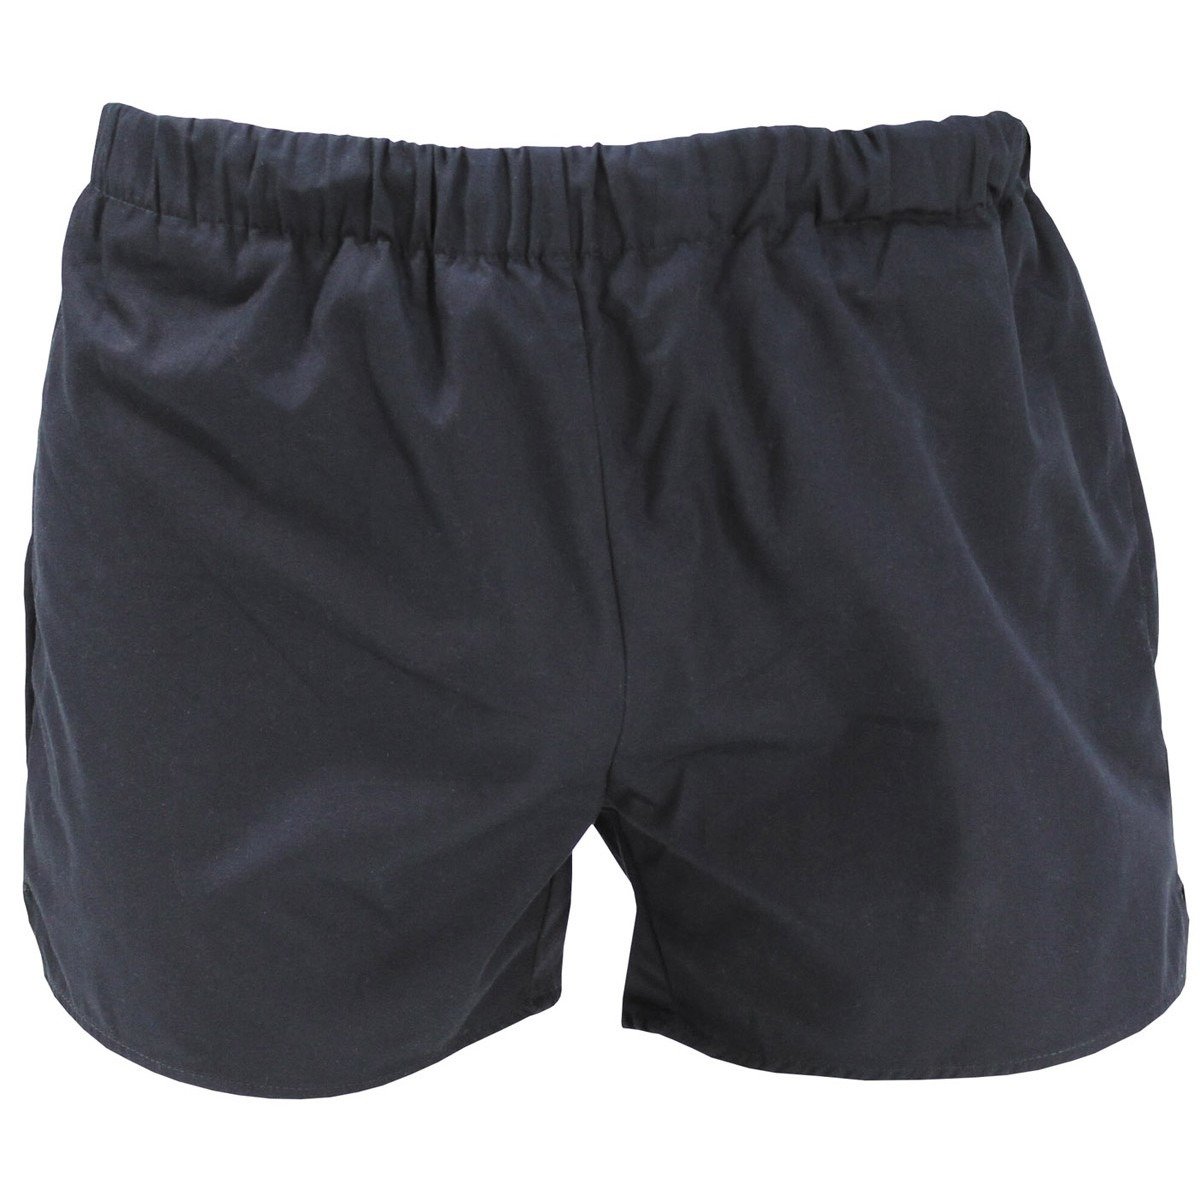 GB SPORTS SHORTS - WITH INNER LINING - BLUE - USED | Military Surplus ...